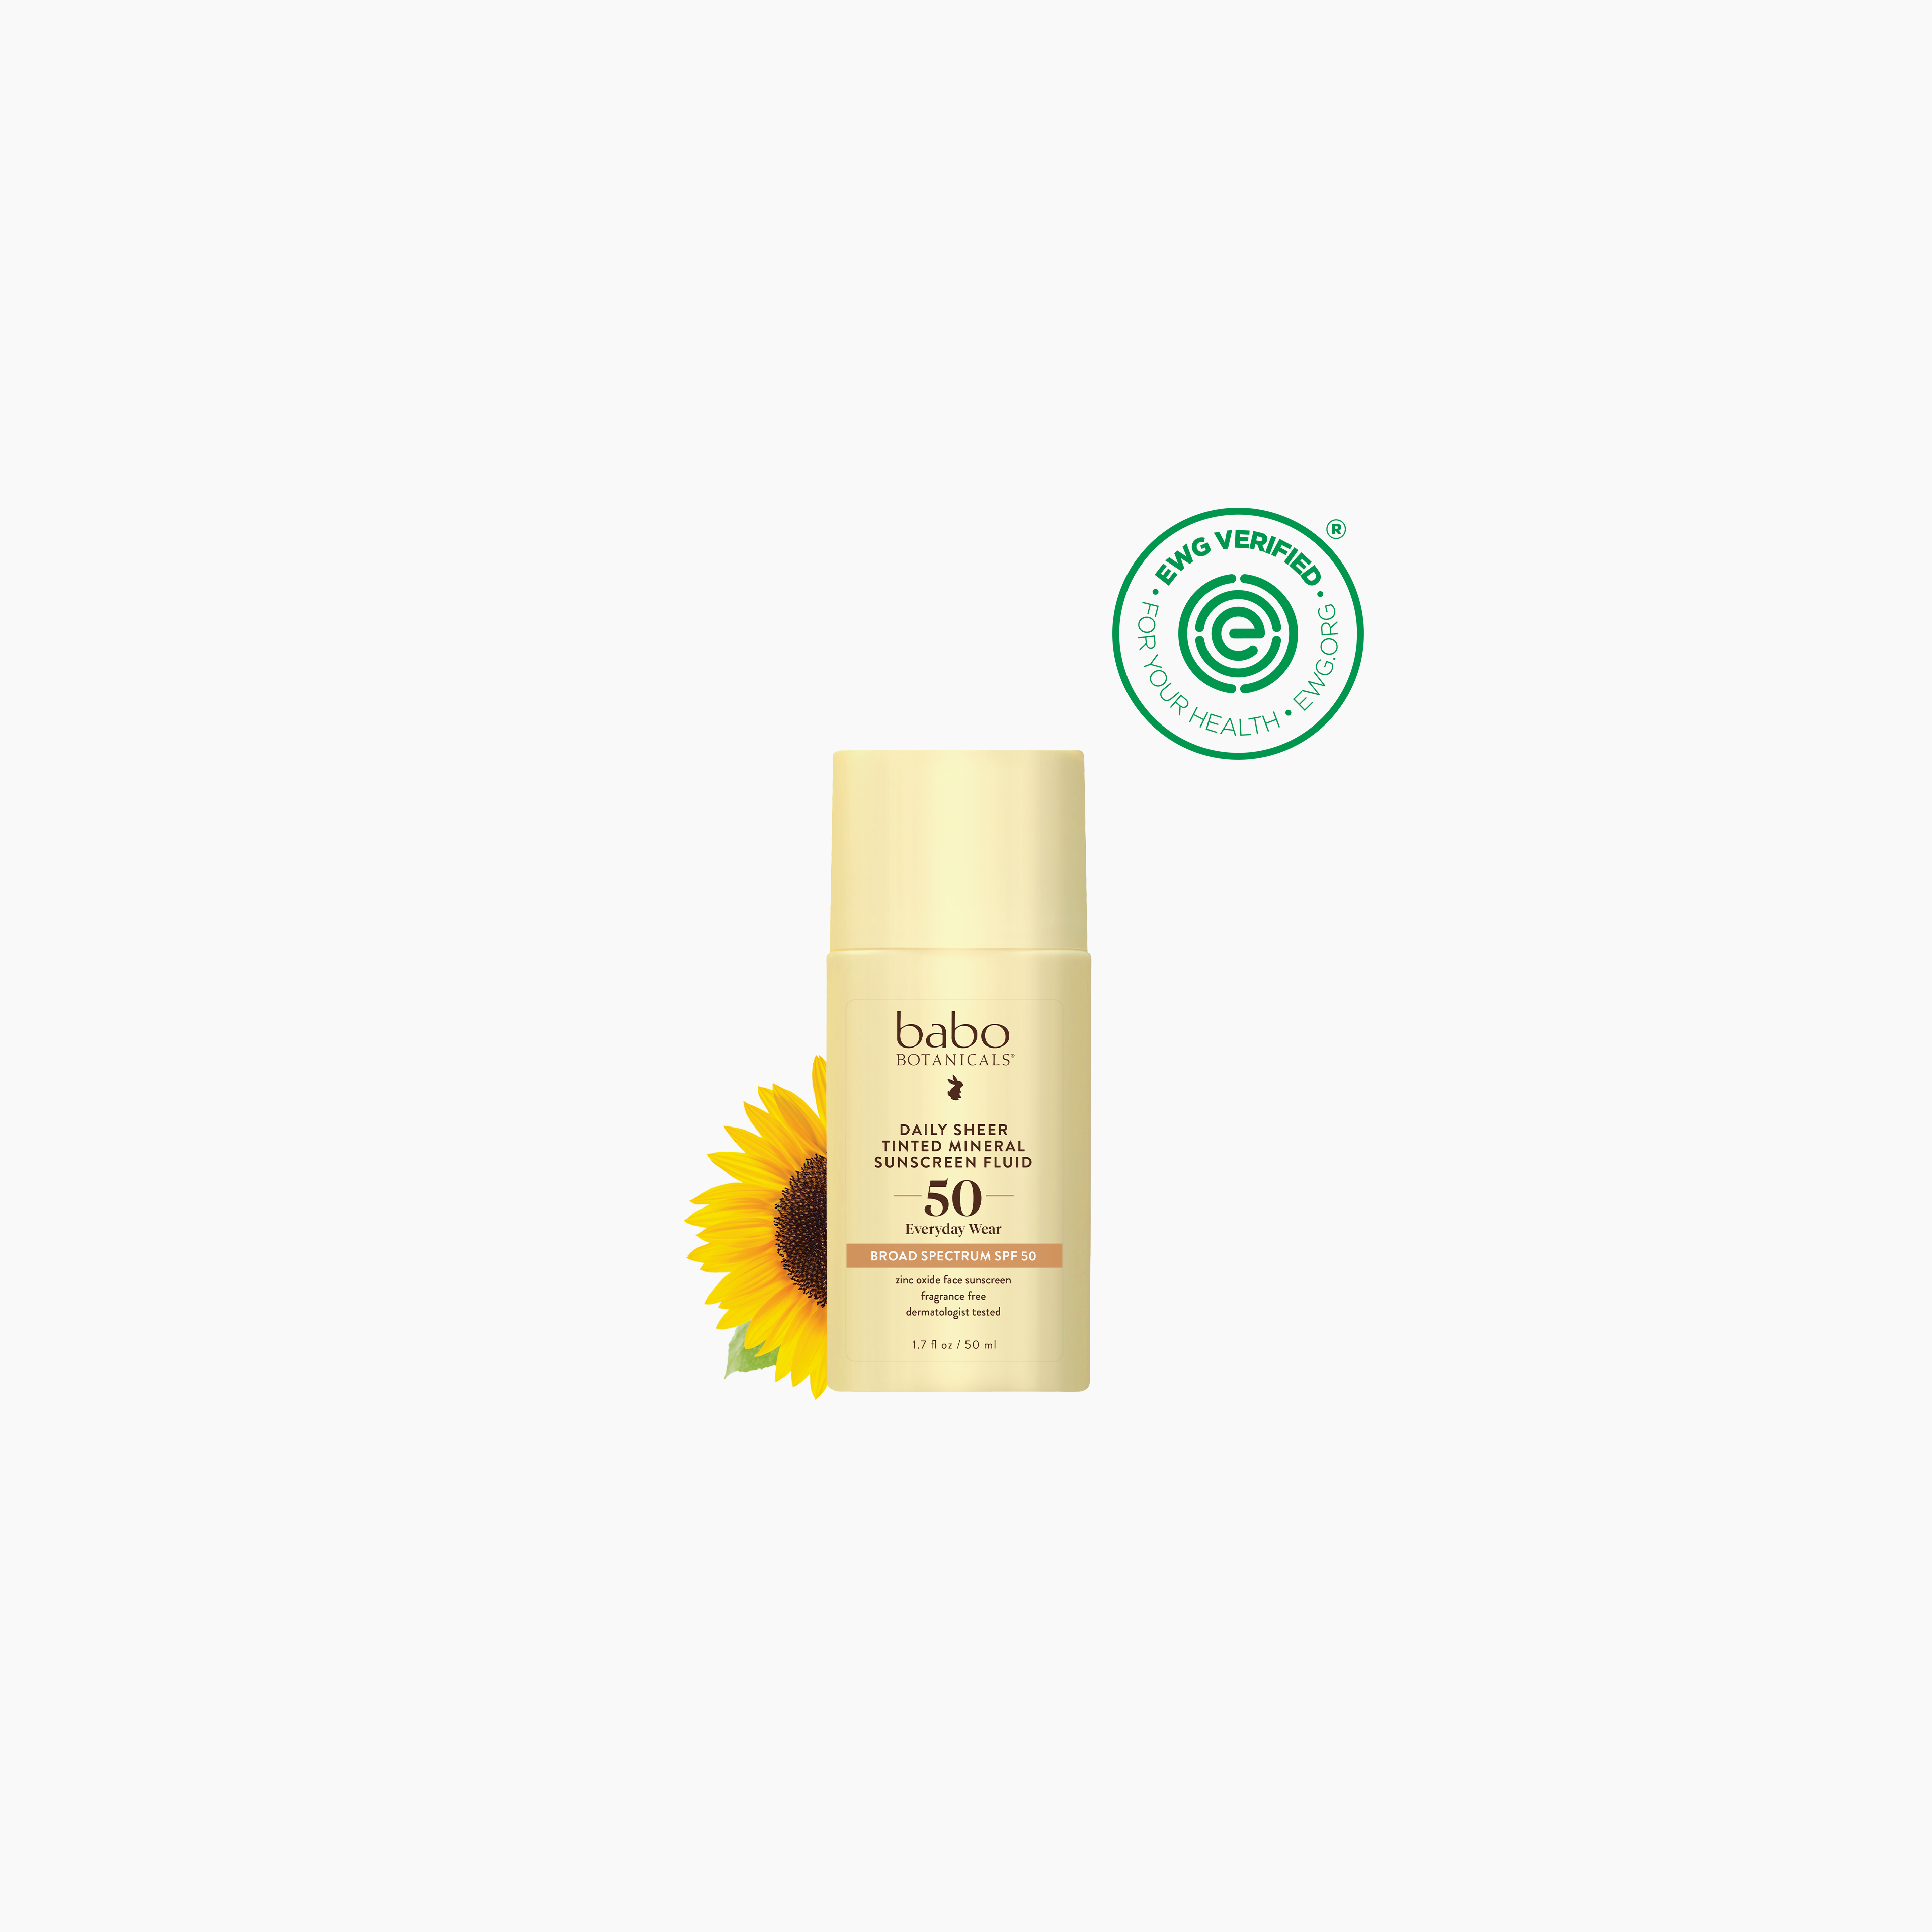 Daily Sheer Tinted Mineral Sunscreen Fluid SPF50